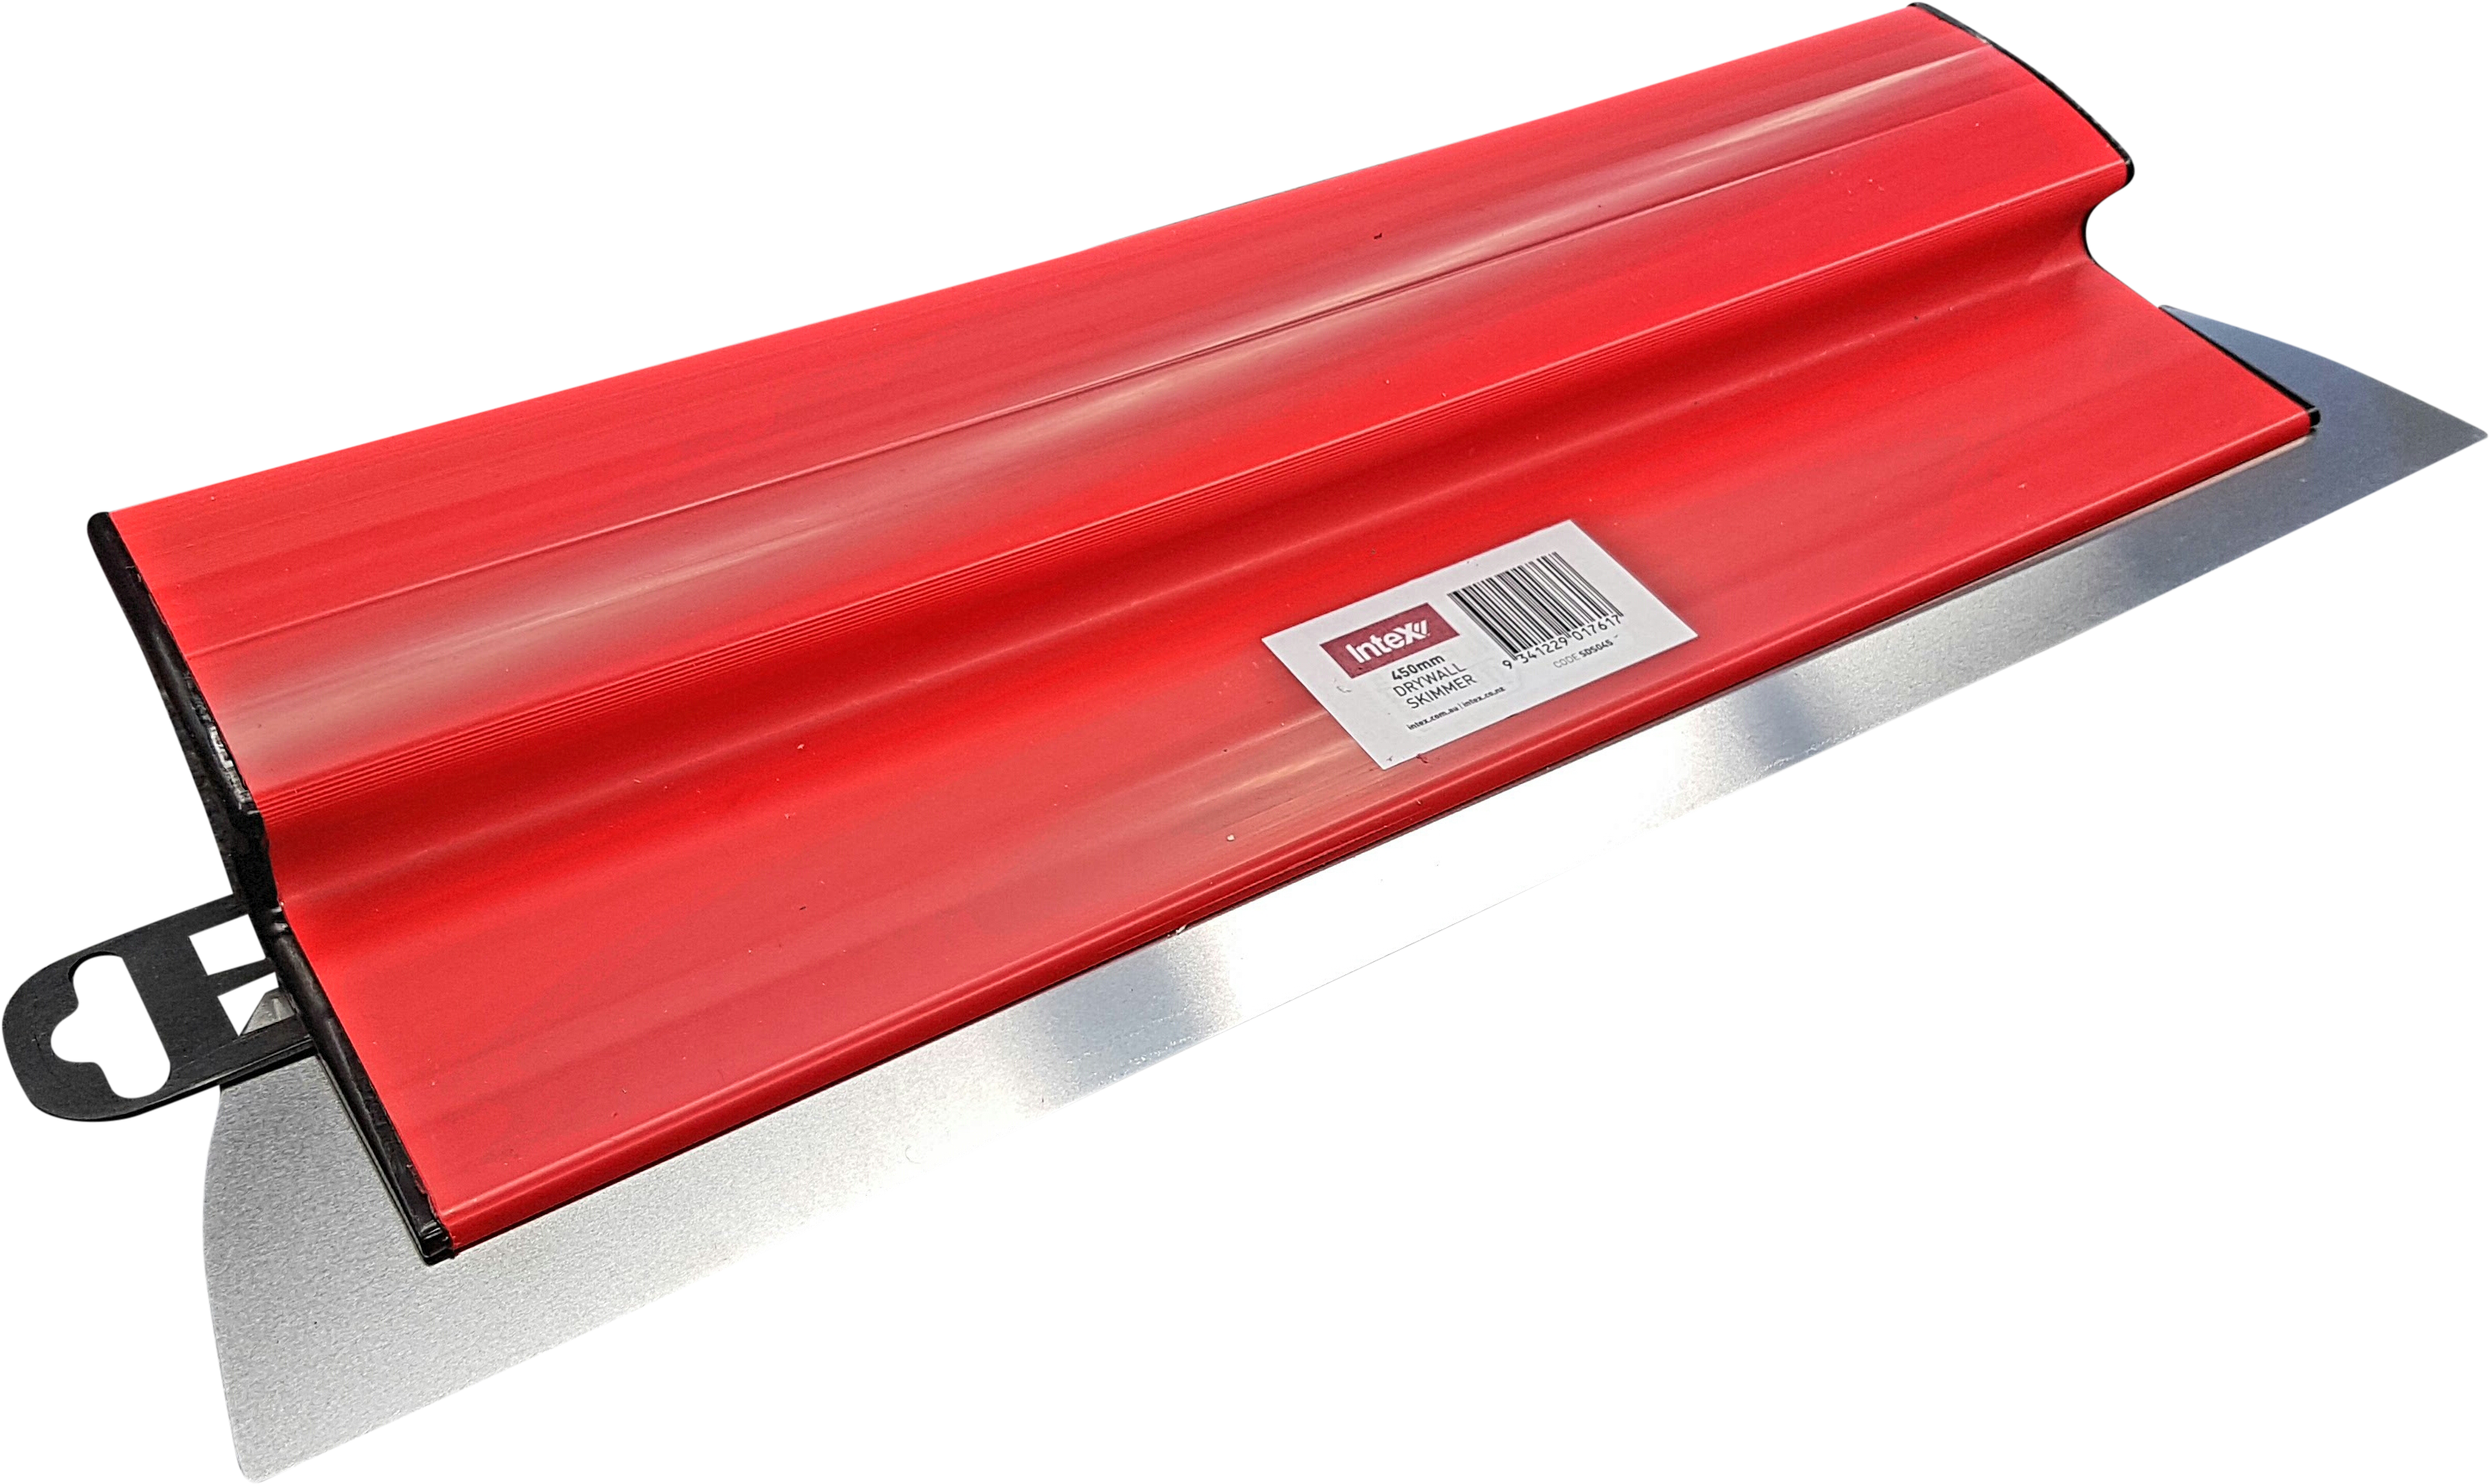 A Red Rectangular Object With A White Label